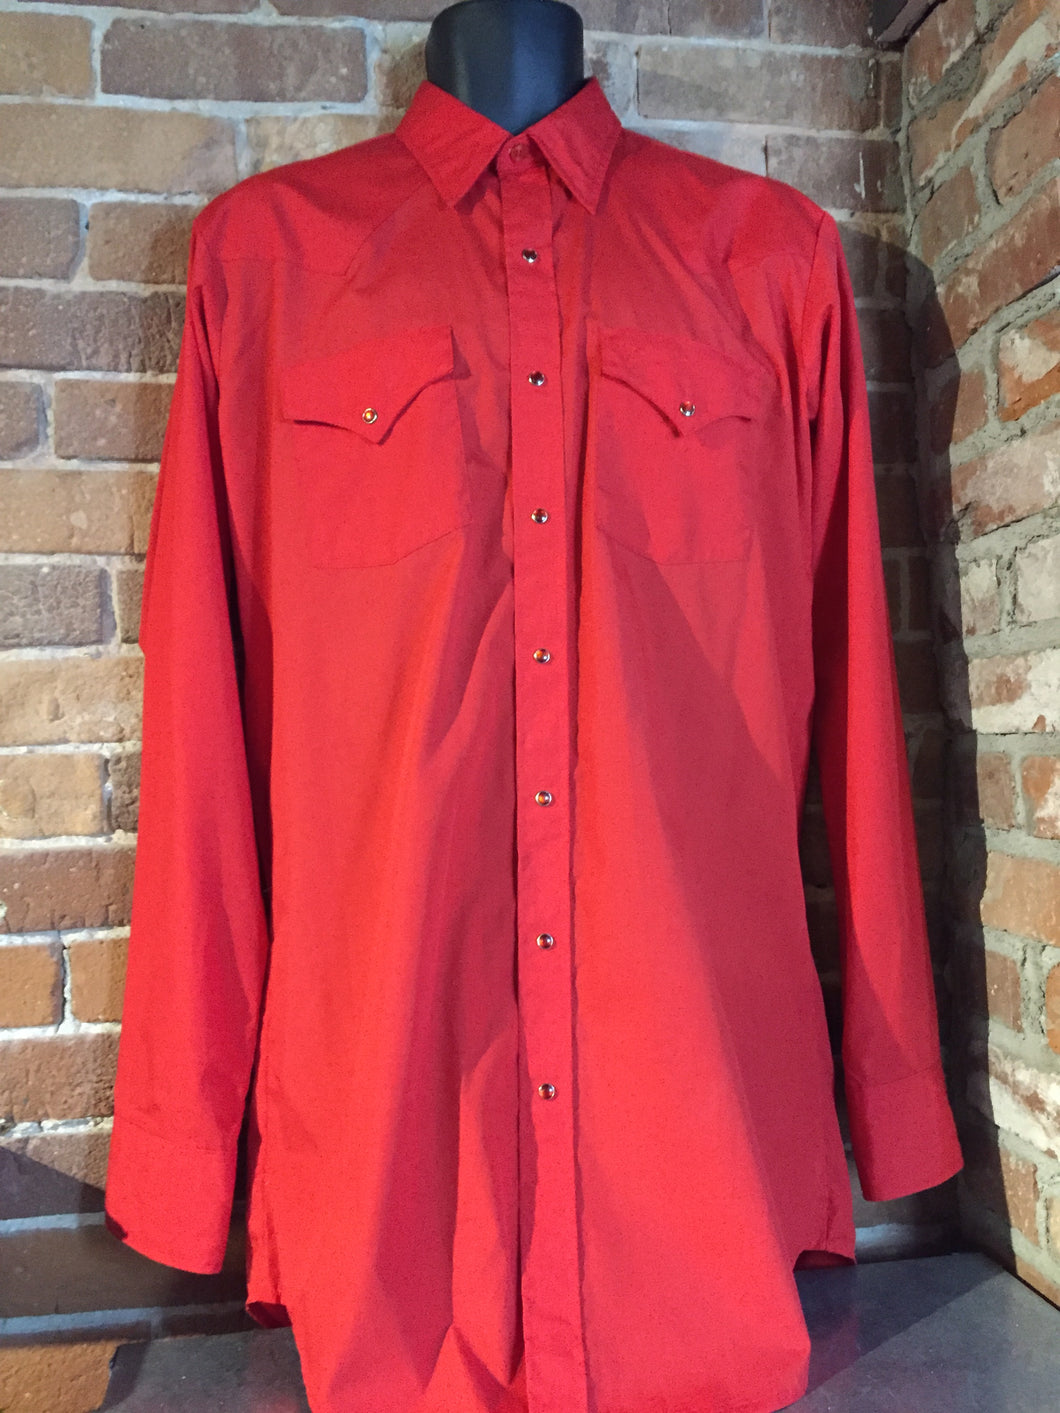 Kingspier Vintage - MWG red western style button up shirt. Cotton and polyester blend. Mens size large.
